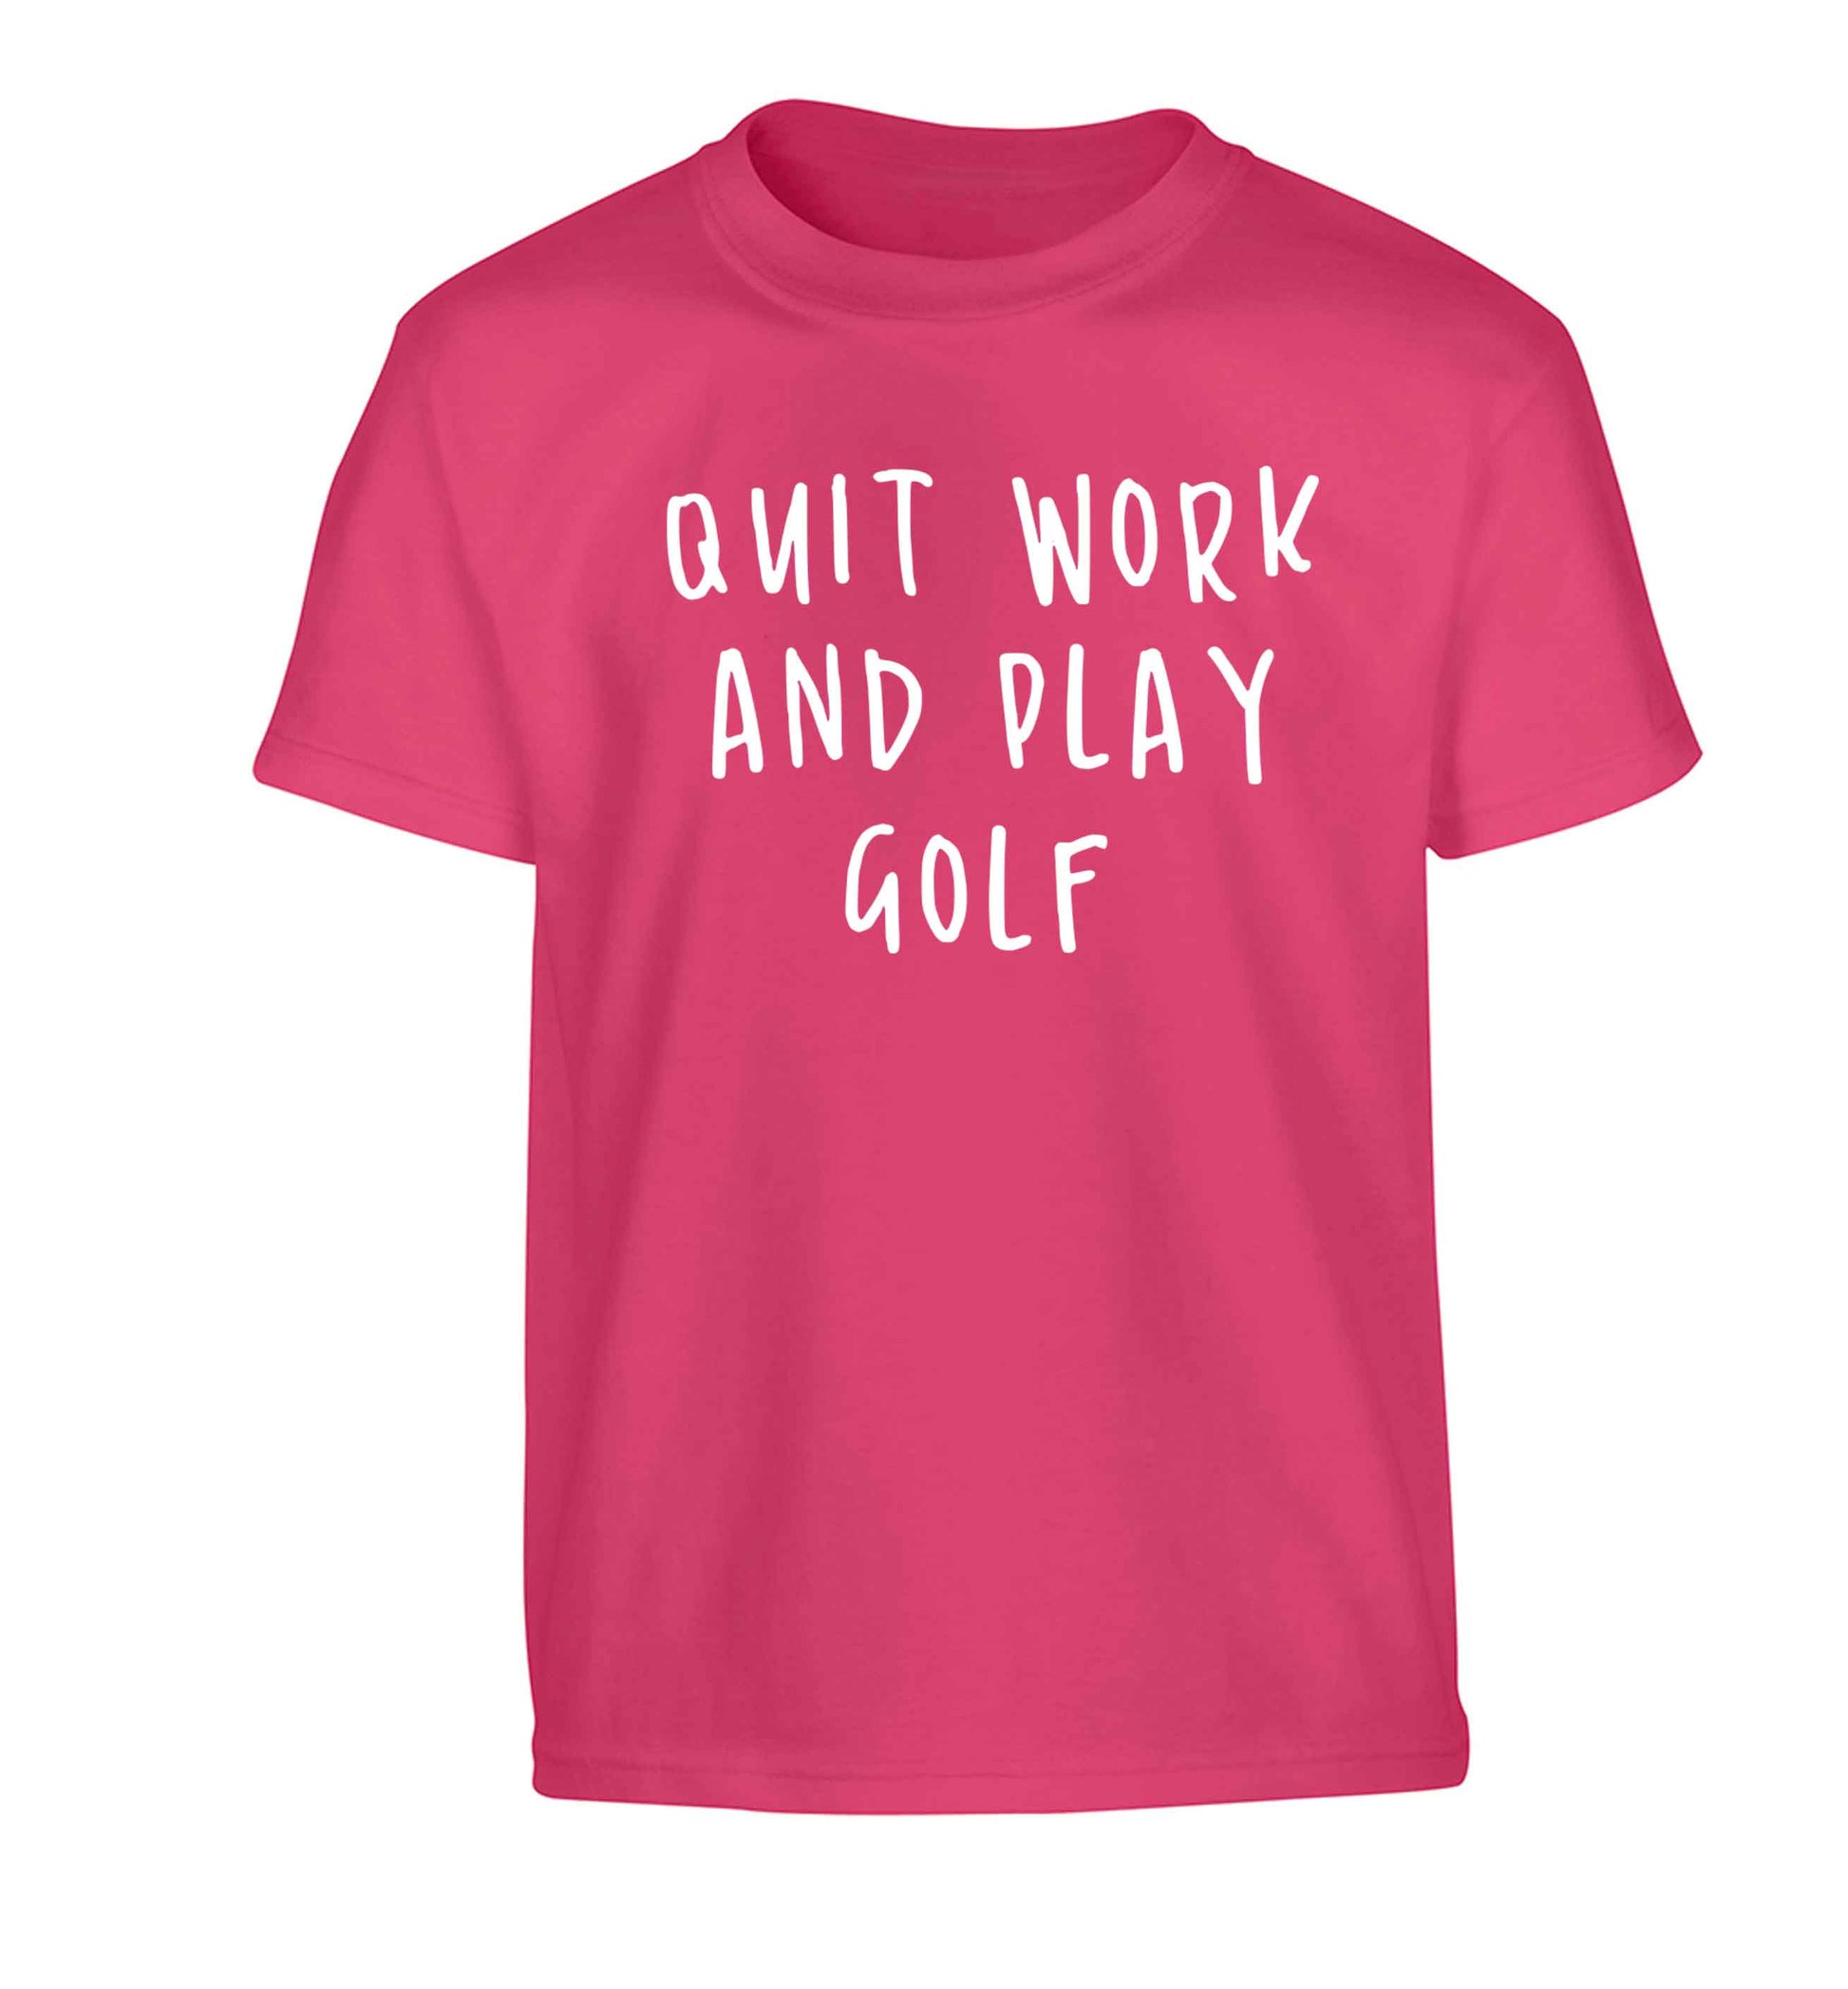 Quit work and play golf Children's pink Tshirt 12-13 Years